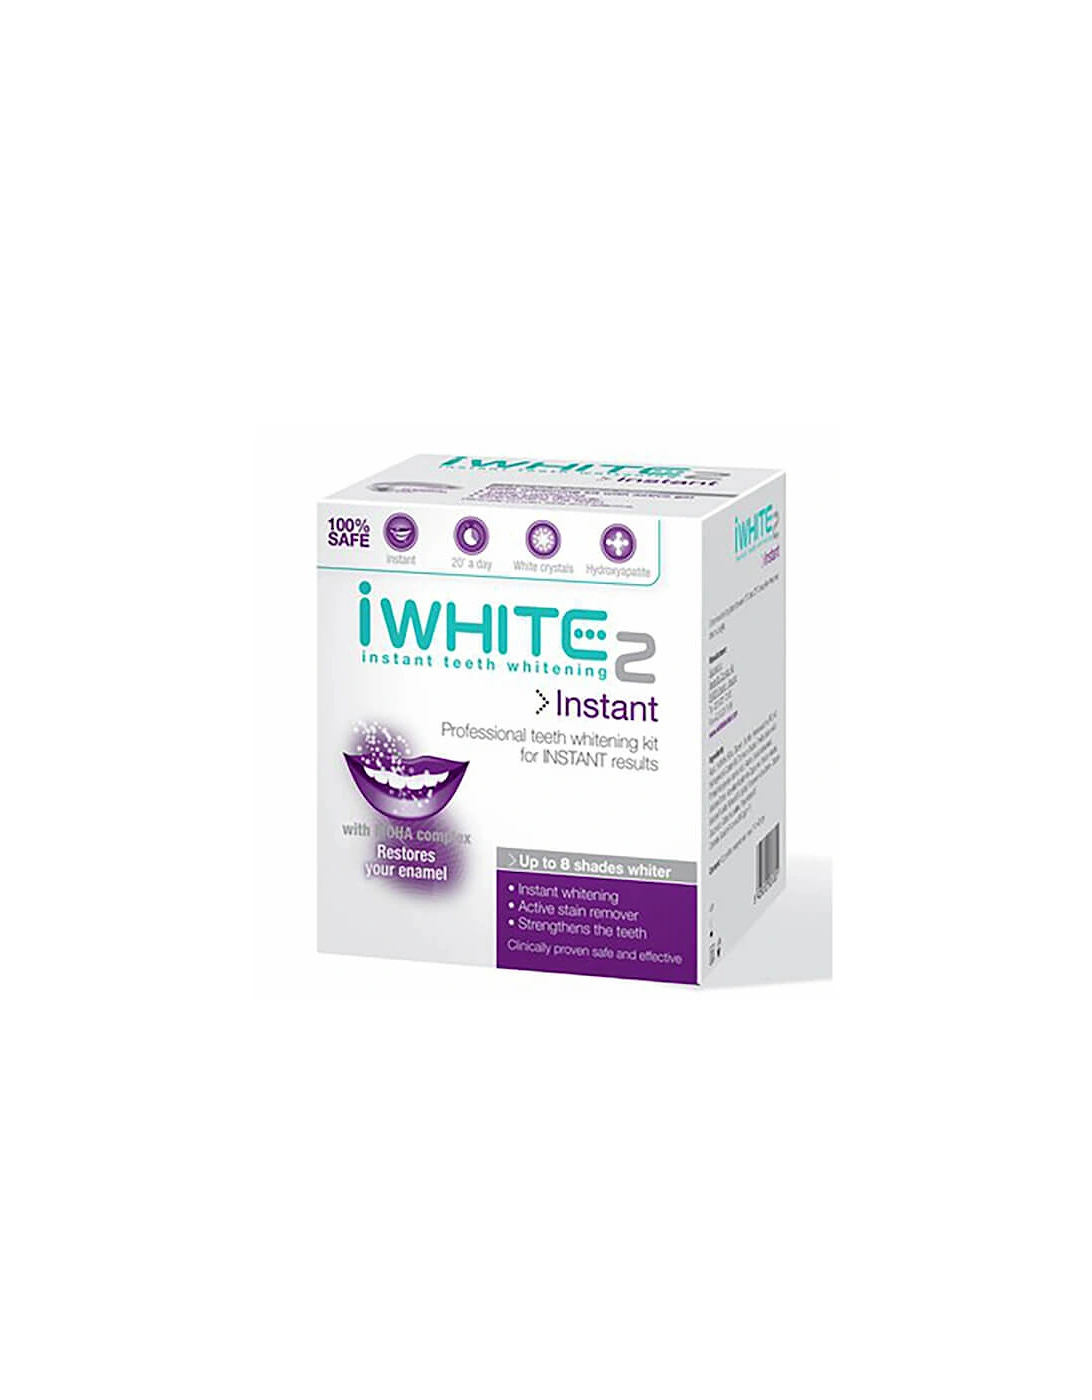 Instant 2 Professional Teeth Whitening Kit (10 Trays) - - Instant 2 Professional Teeth Whitening Kit (10 Trays) - tracye779, 2 of 1